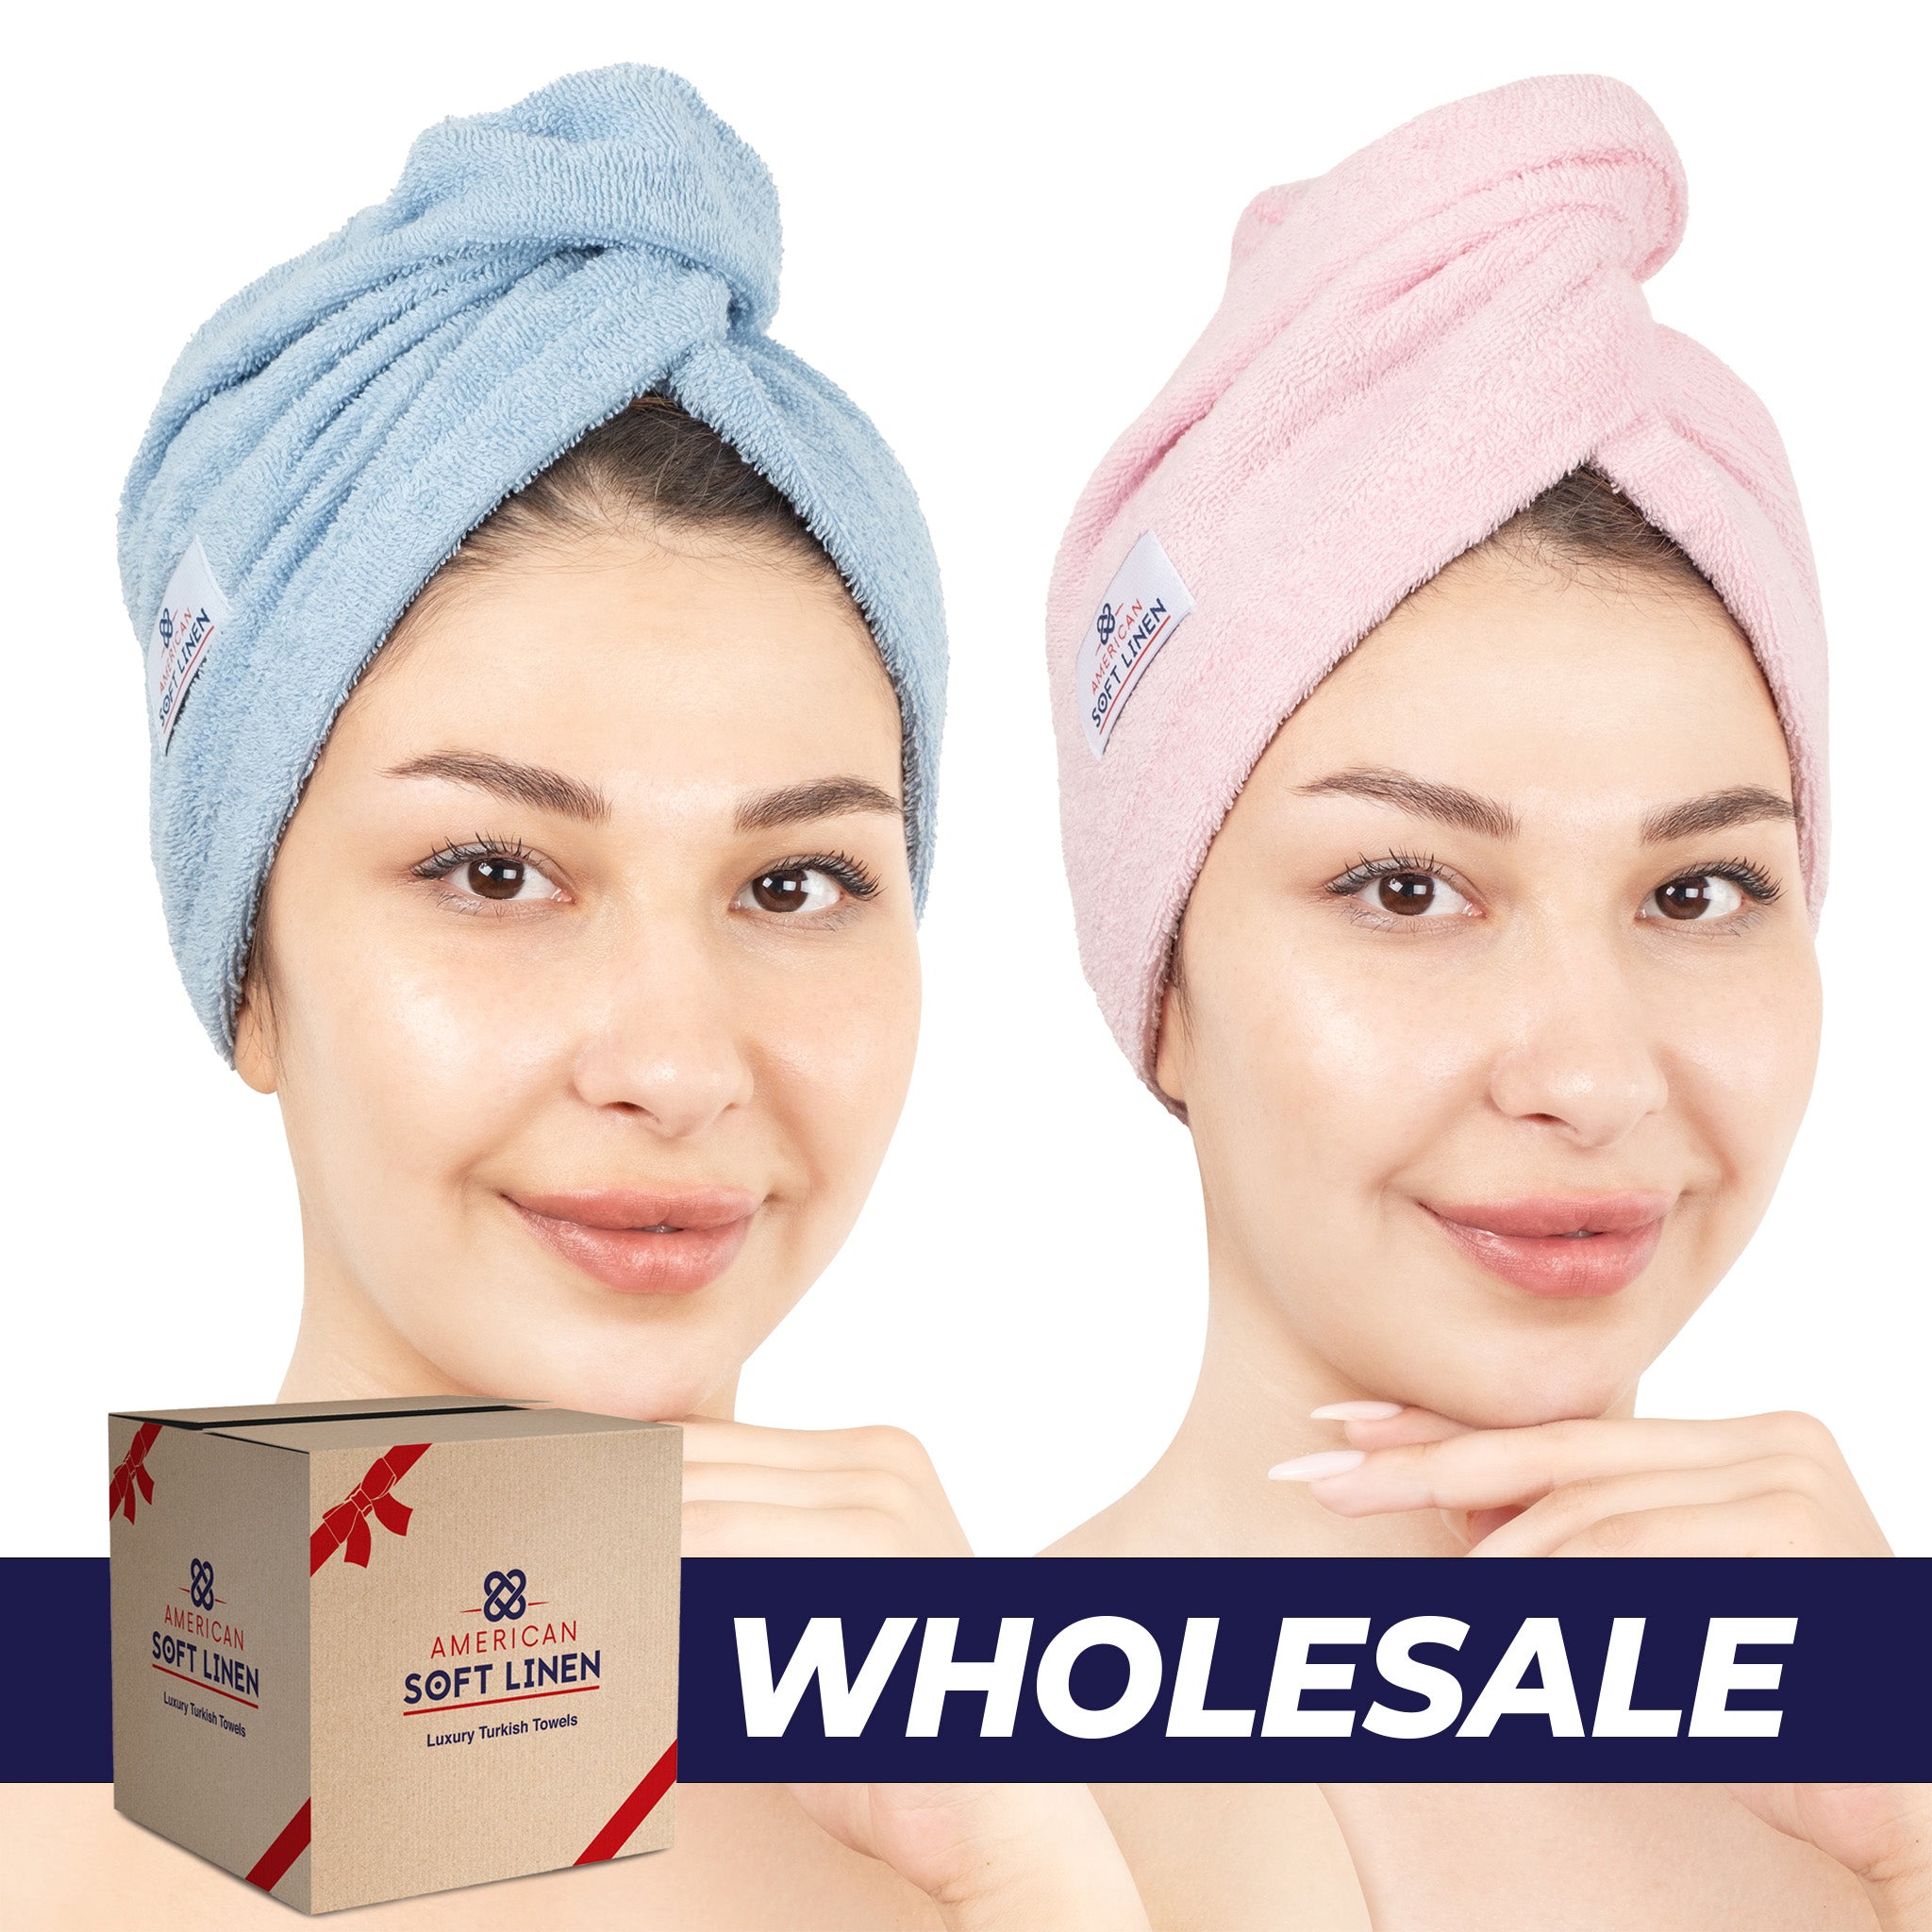 American Soft Linen 100% Cotton Hair Drying Towels for Women 2 pack 75 set case pack sky blue-pink-0